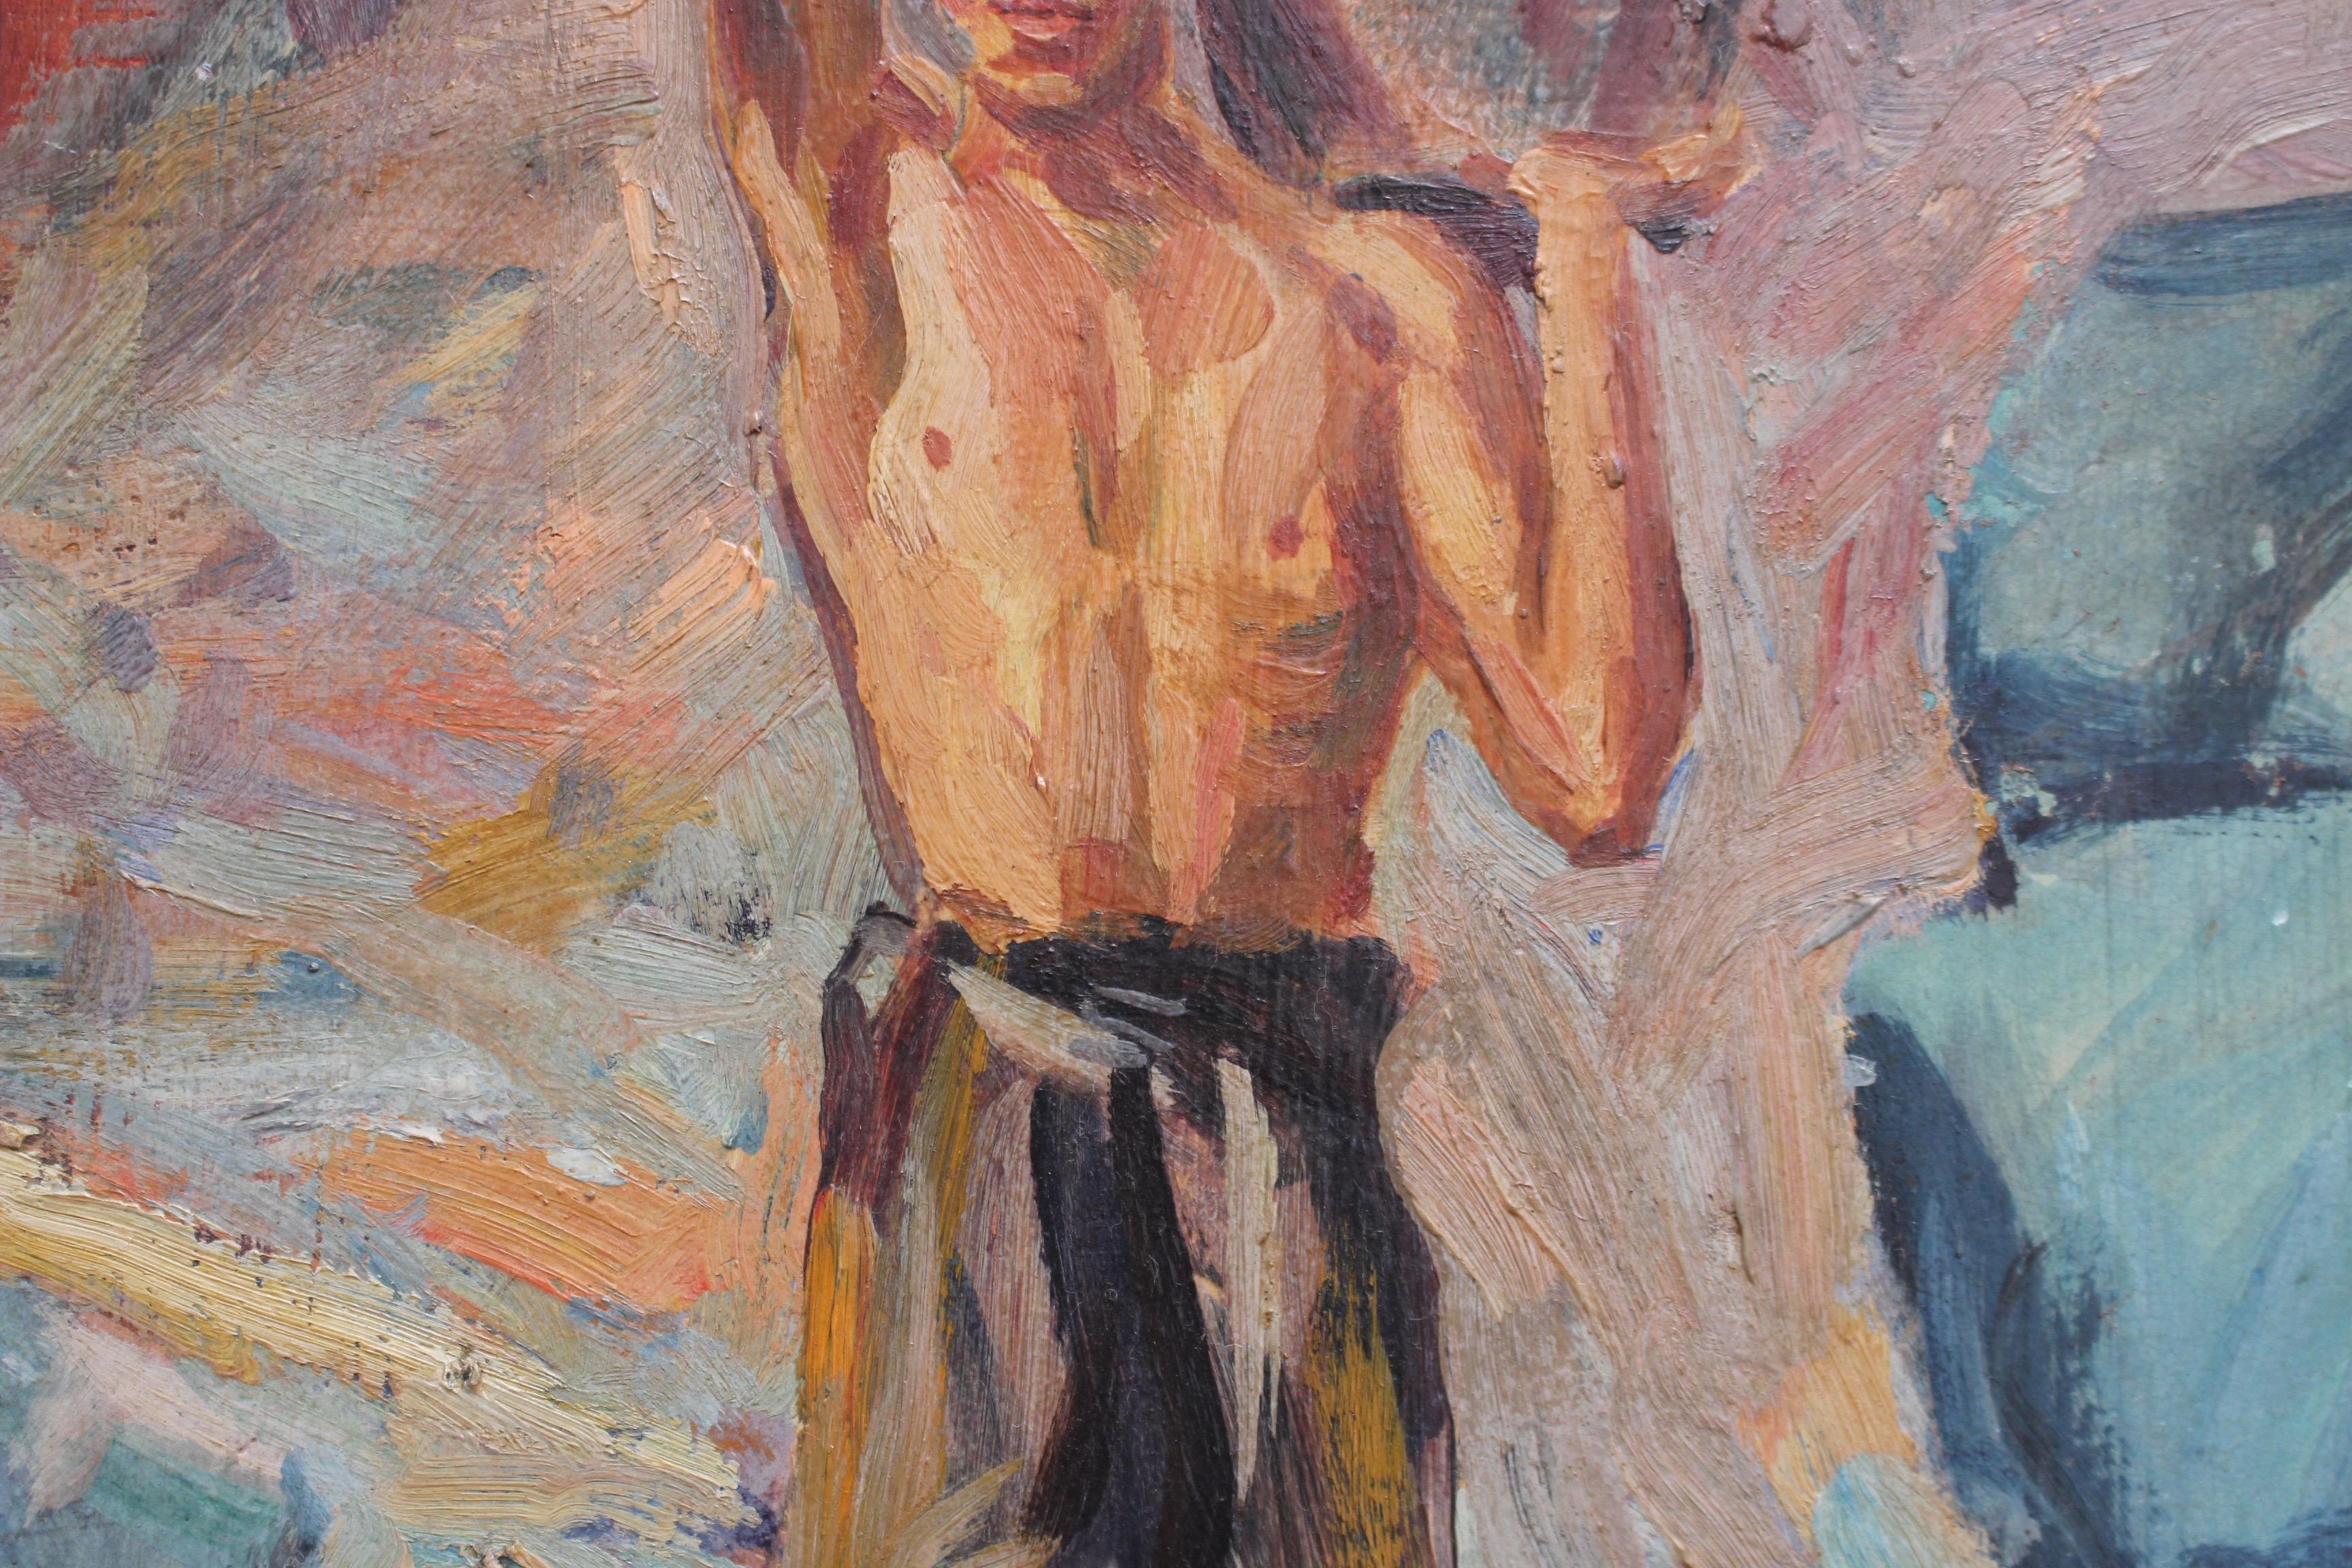 'Portrait of Boy-Haulier with Bucket' (1950), oil on board, by Italian artist, G. Amore. In the early 20th century, Italian boys and young men were often engaged in mining in both the Sicilian sulphur mines and marble mines in the Tuscan centre of